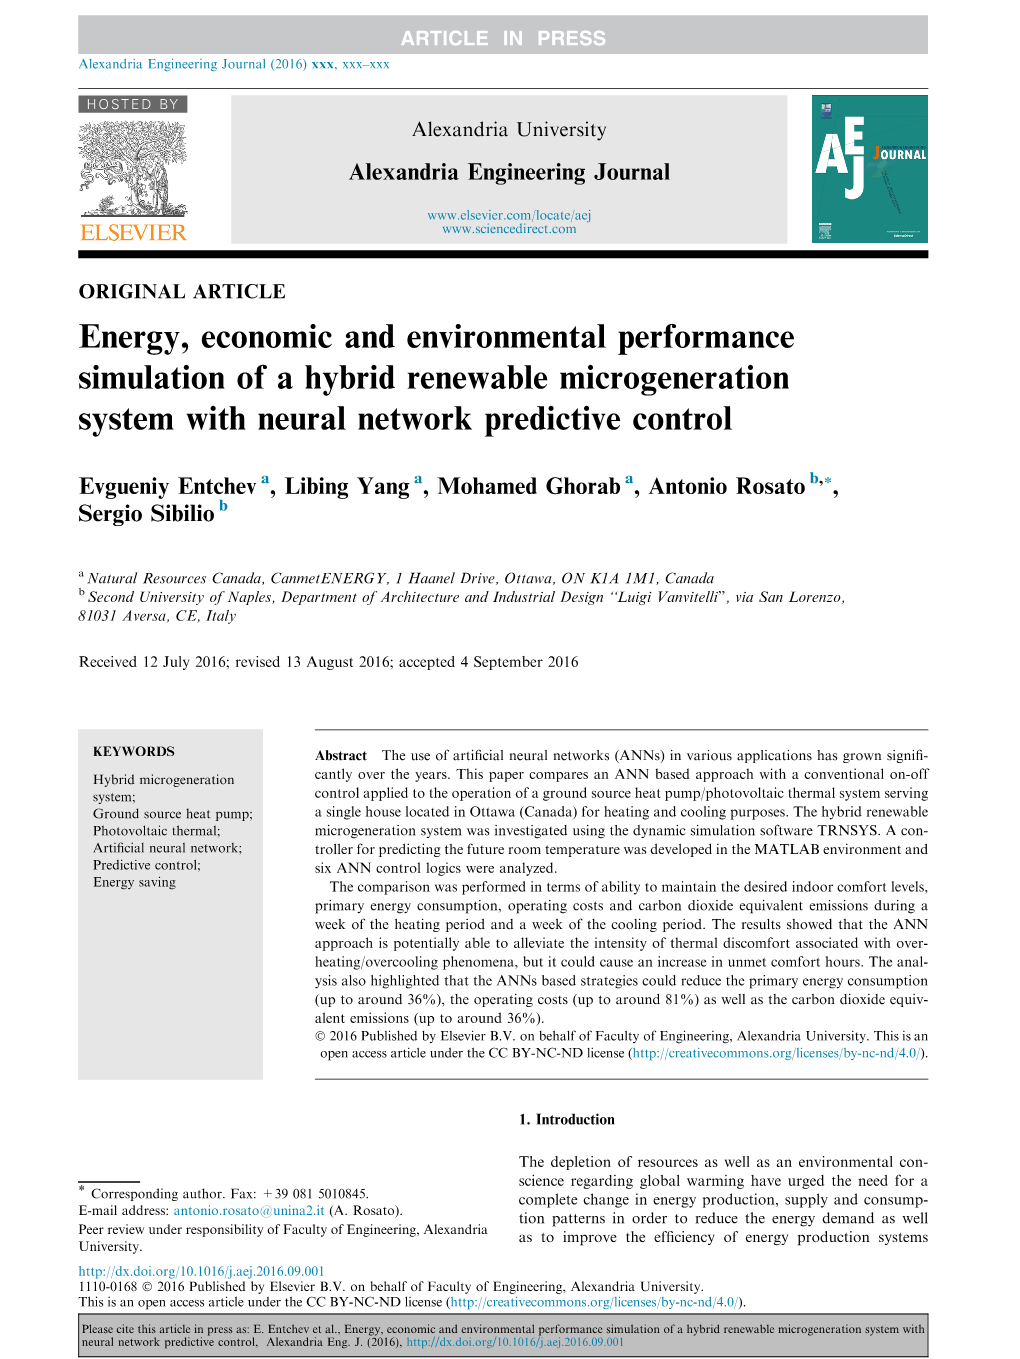 Energy, Economic and Environmental Performance Simulation of a Hybrid Renewable Microgeneration System with Neural Network Predictive Control